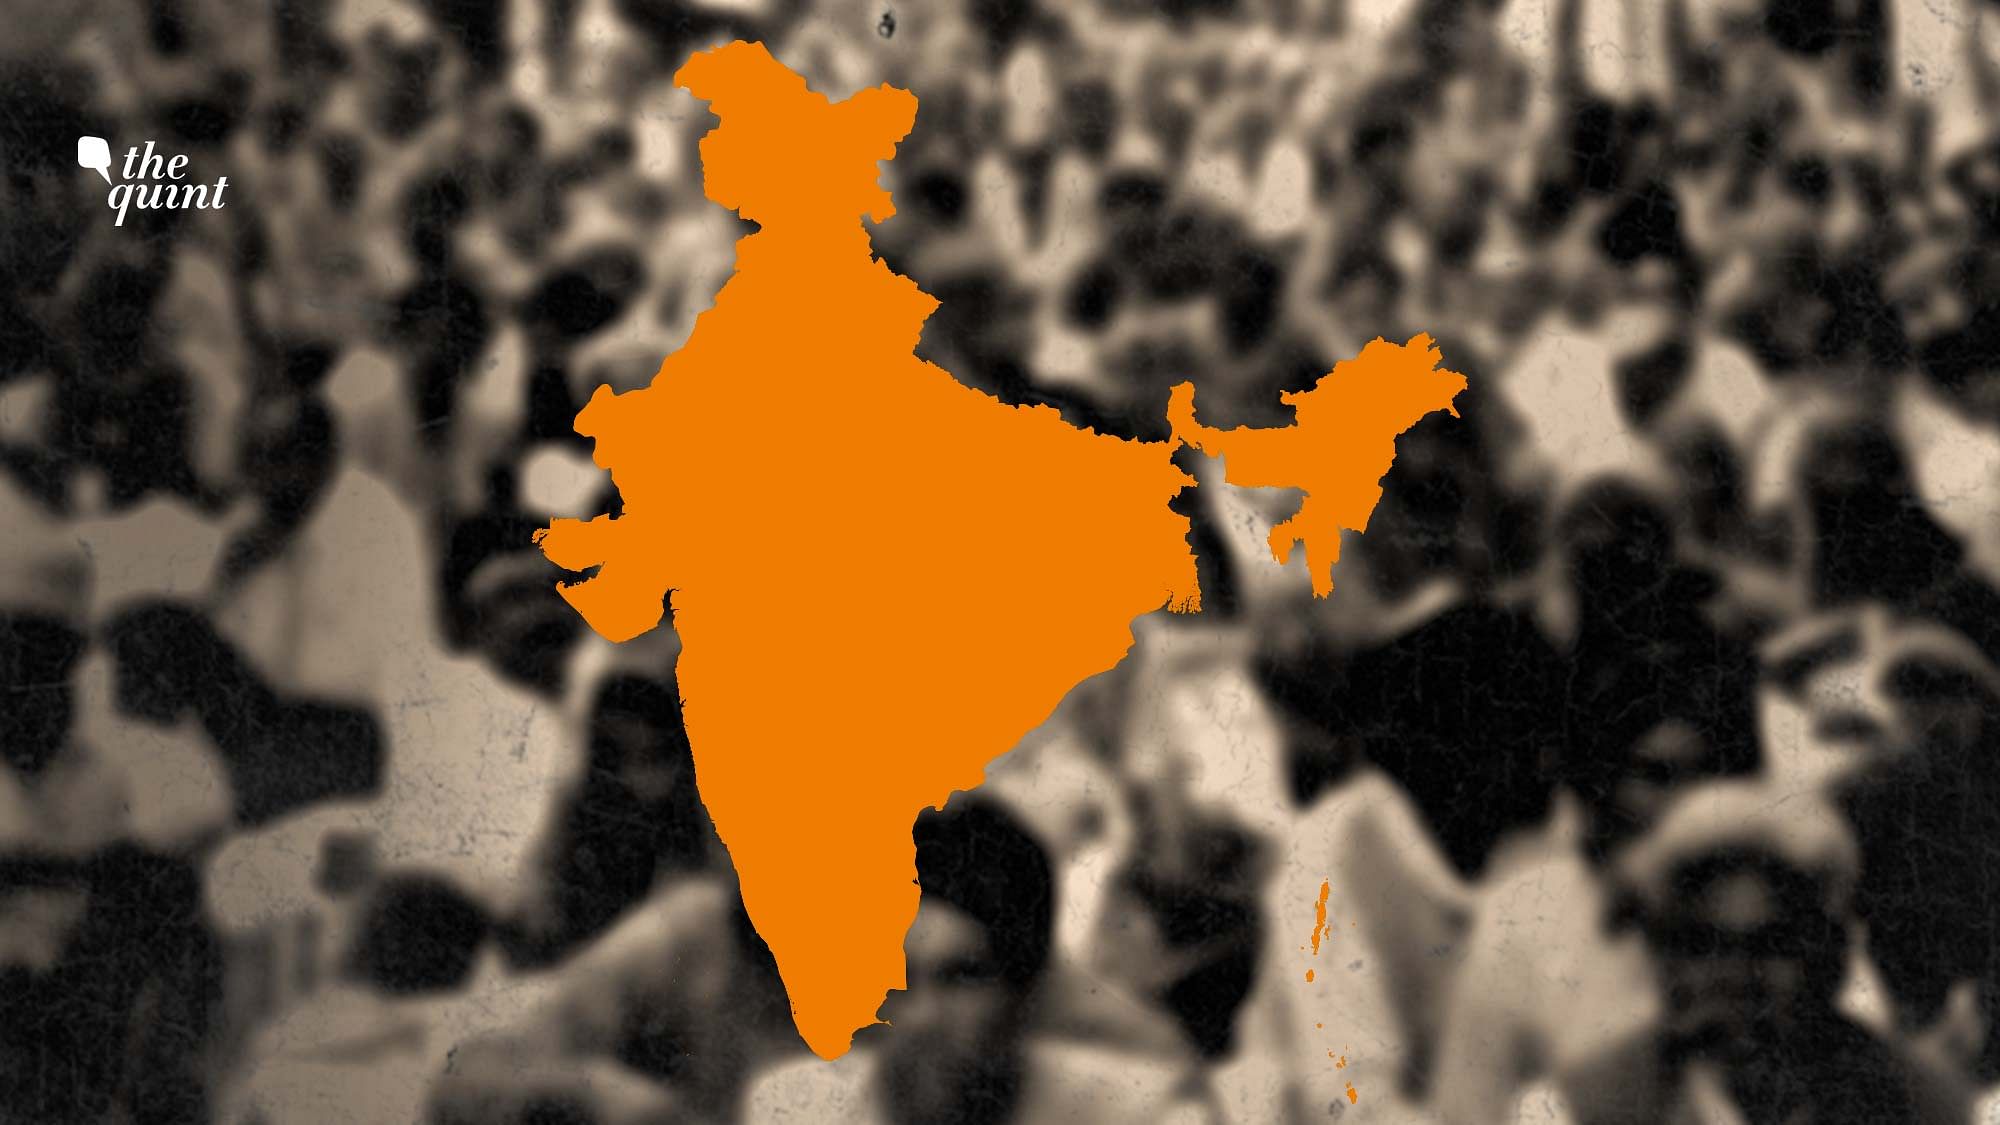 Our Constitution gave dignity to all. Will Hindu Rashtra alter that and restore what was undone by the Constitution?